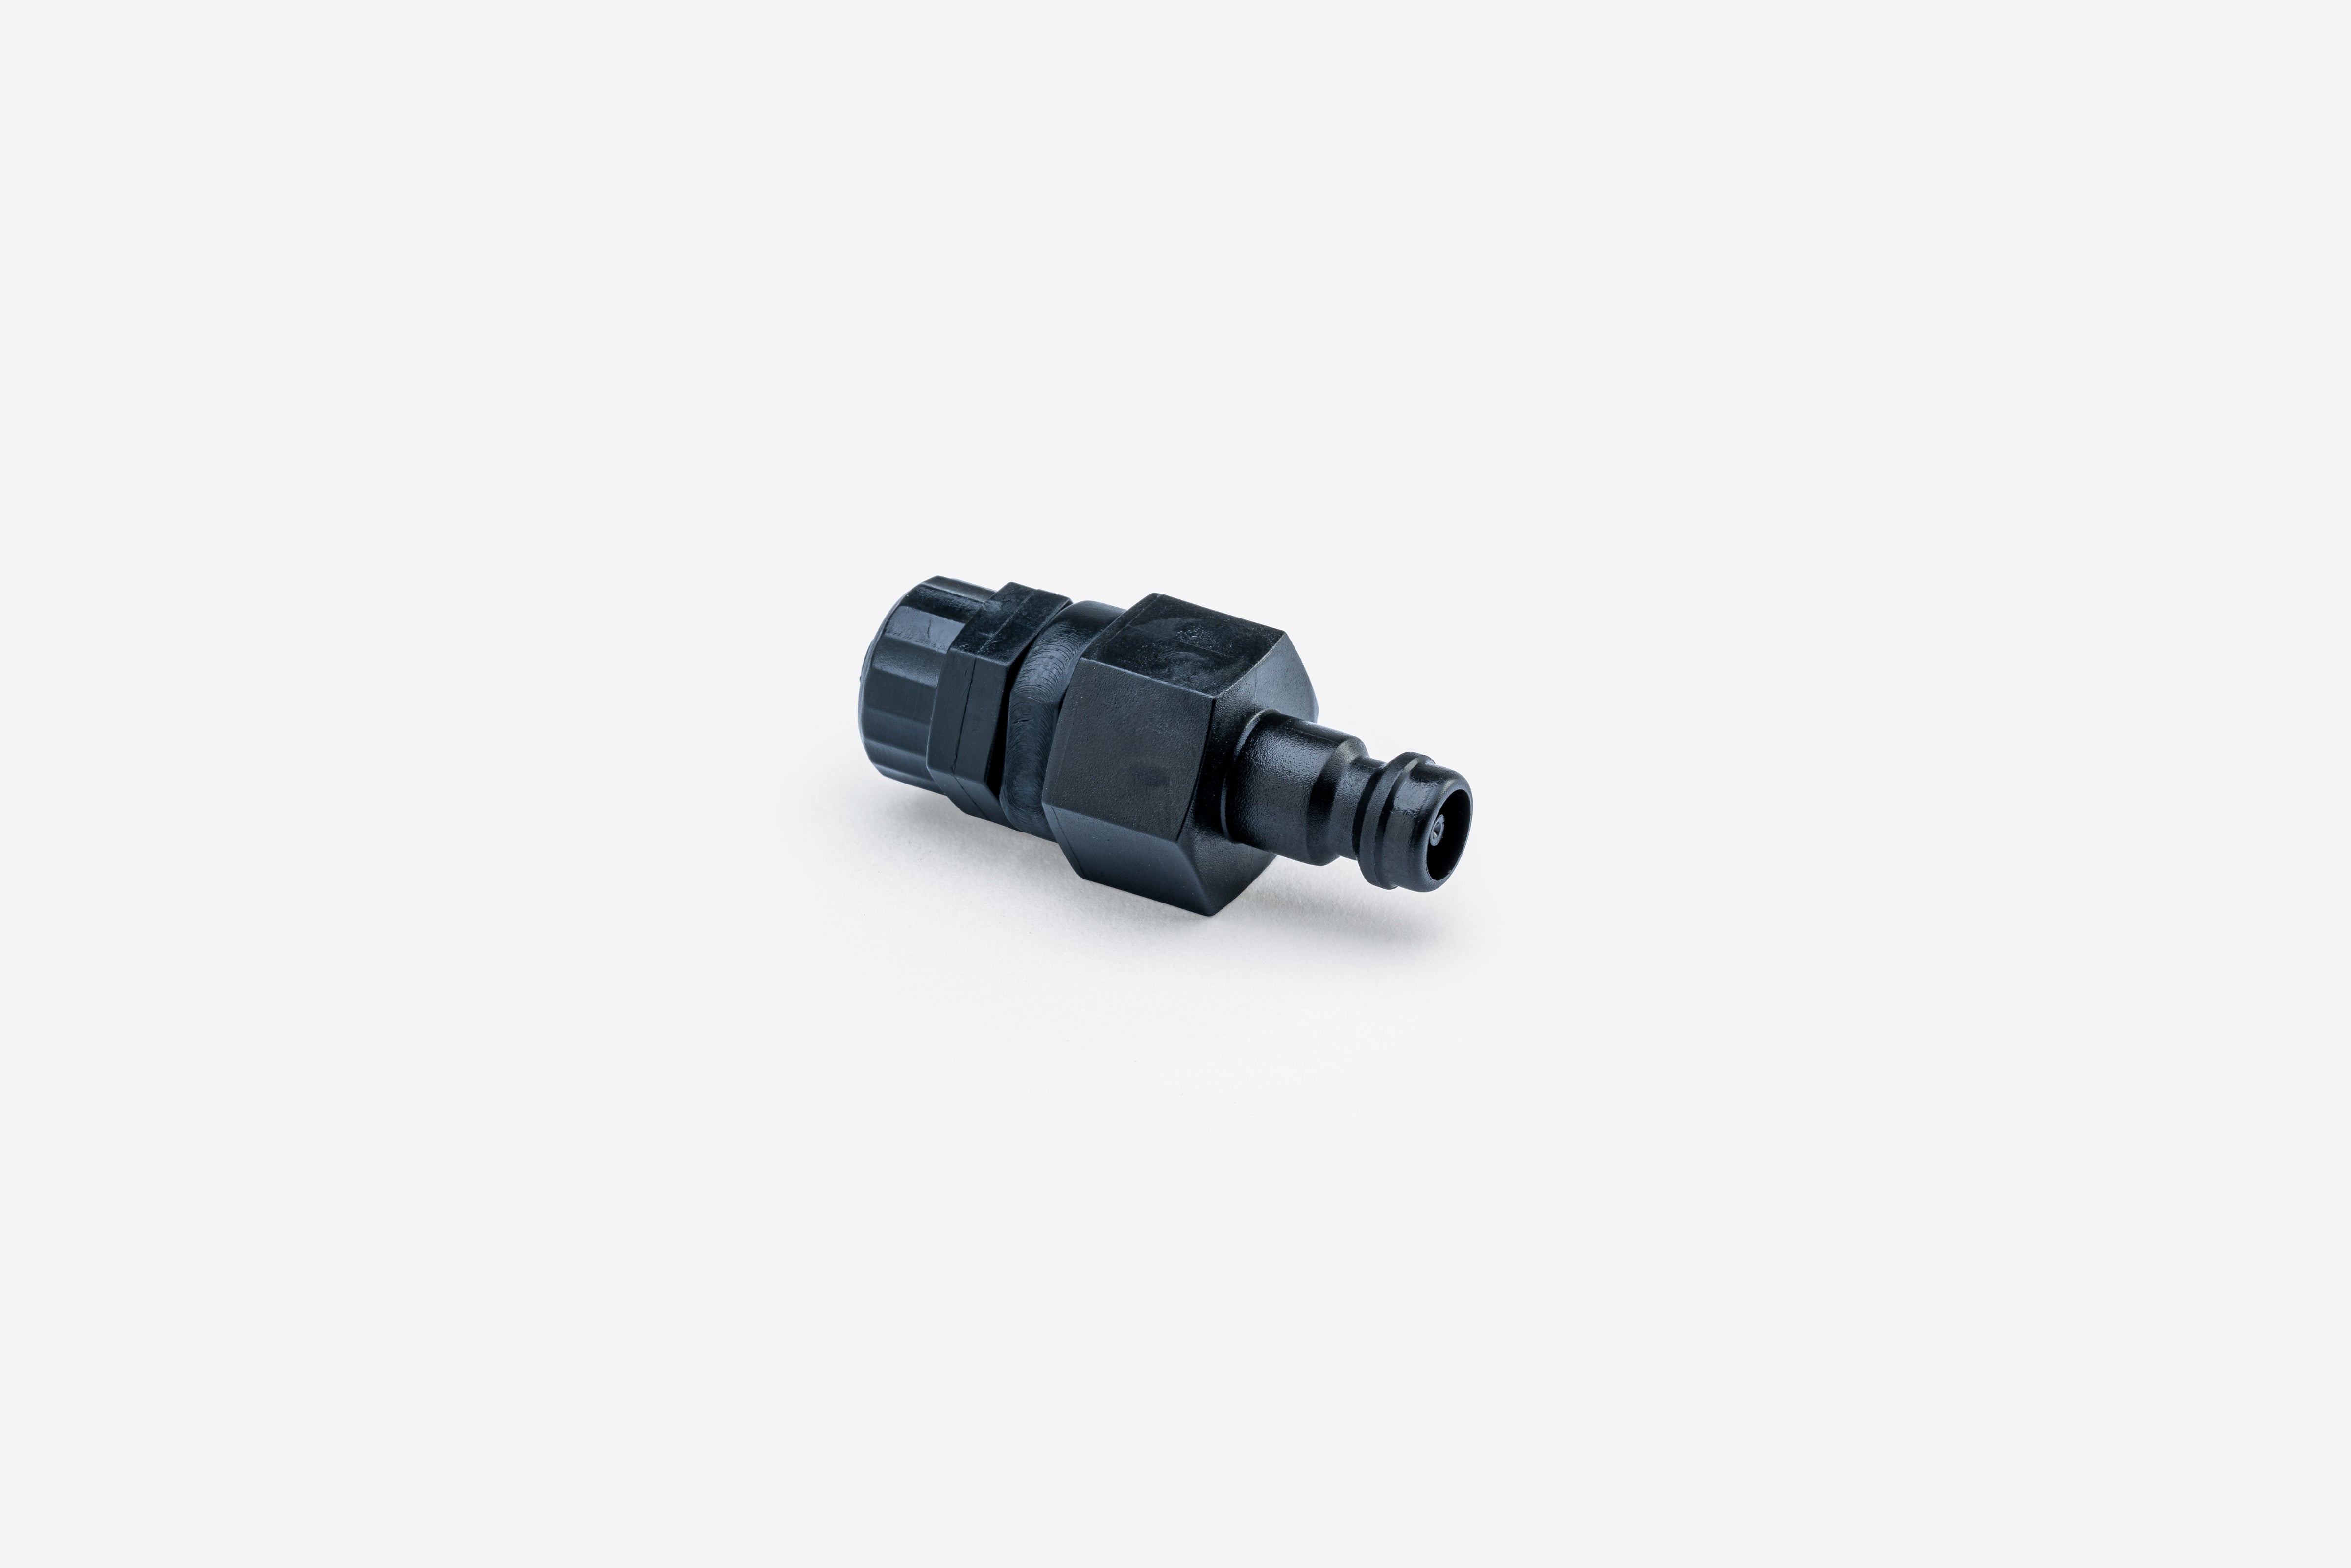 Male Connector to connect Water Heating Hose